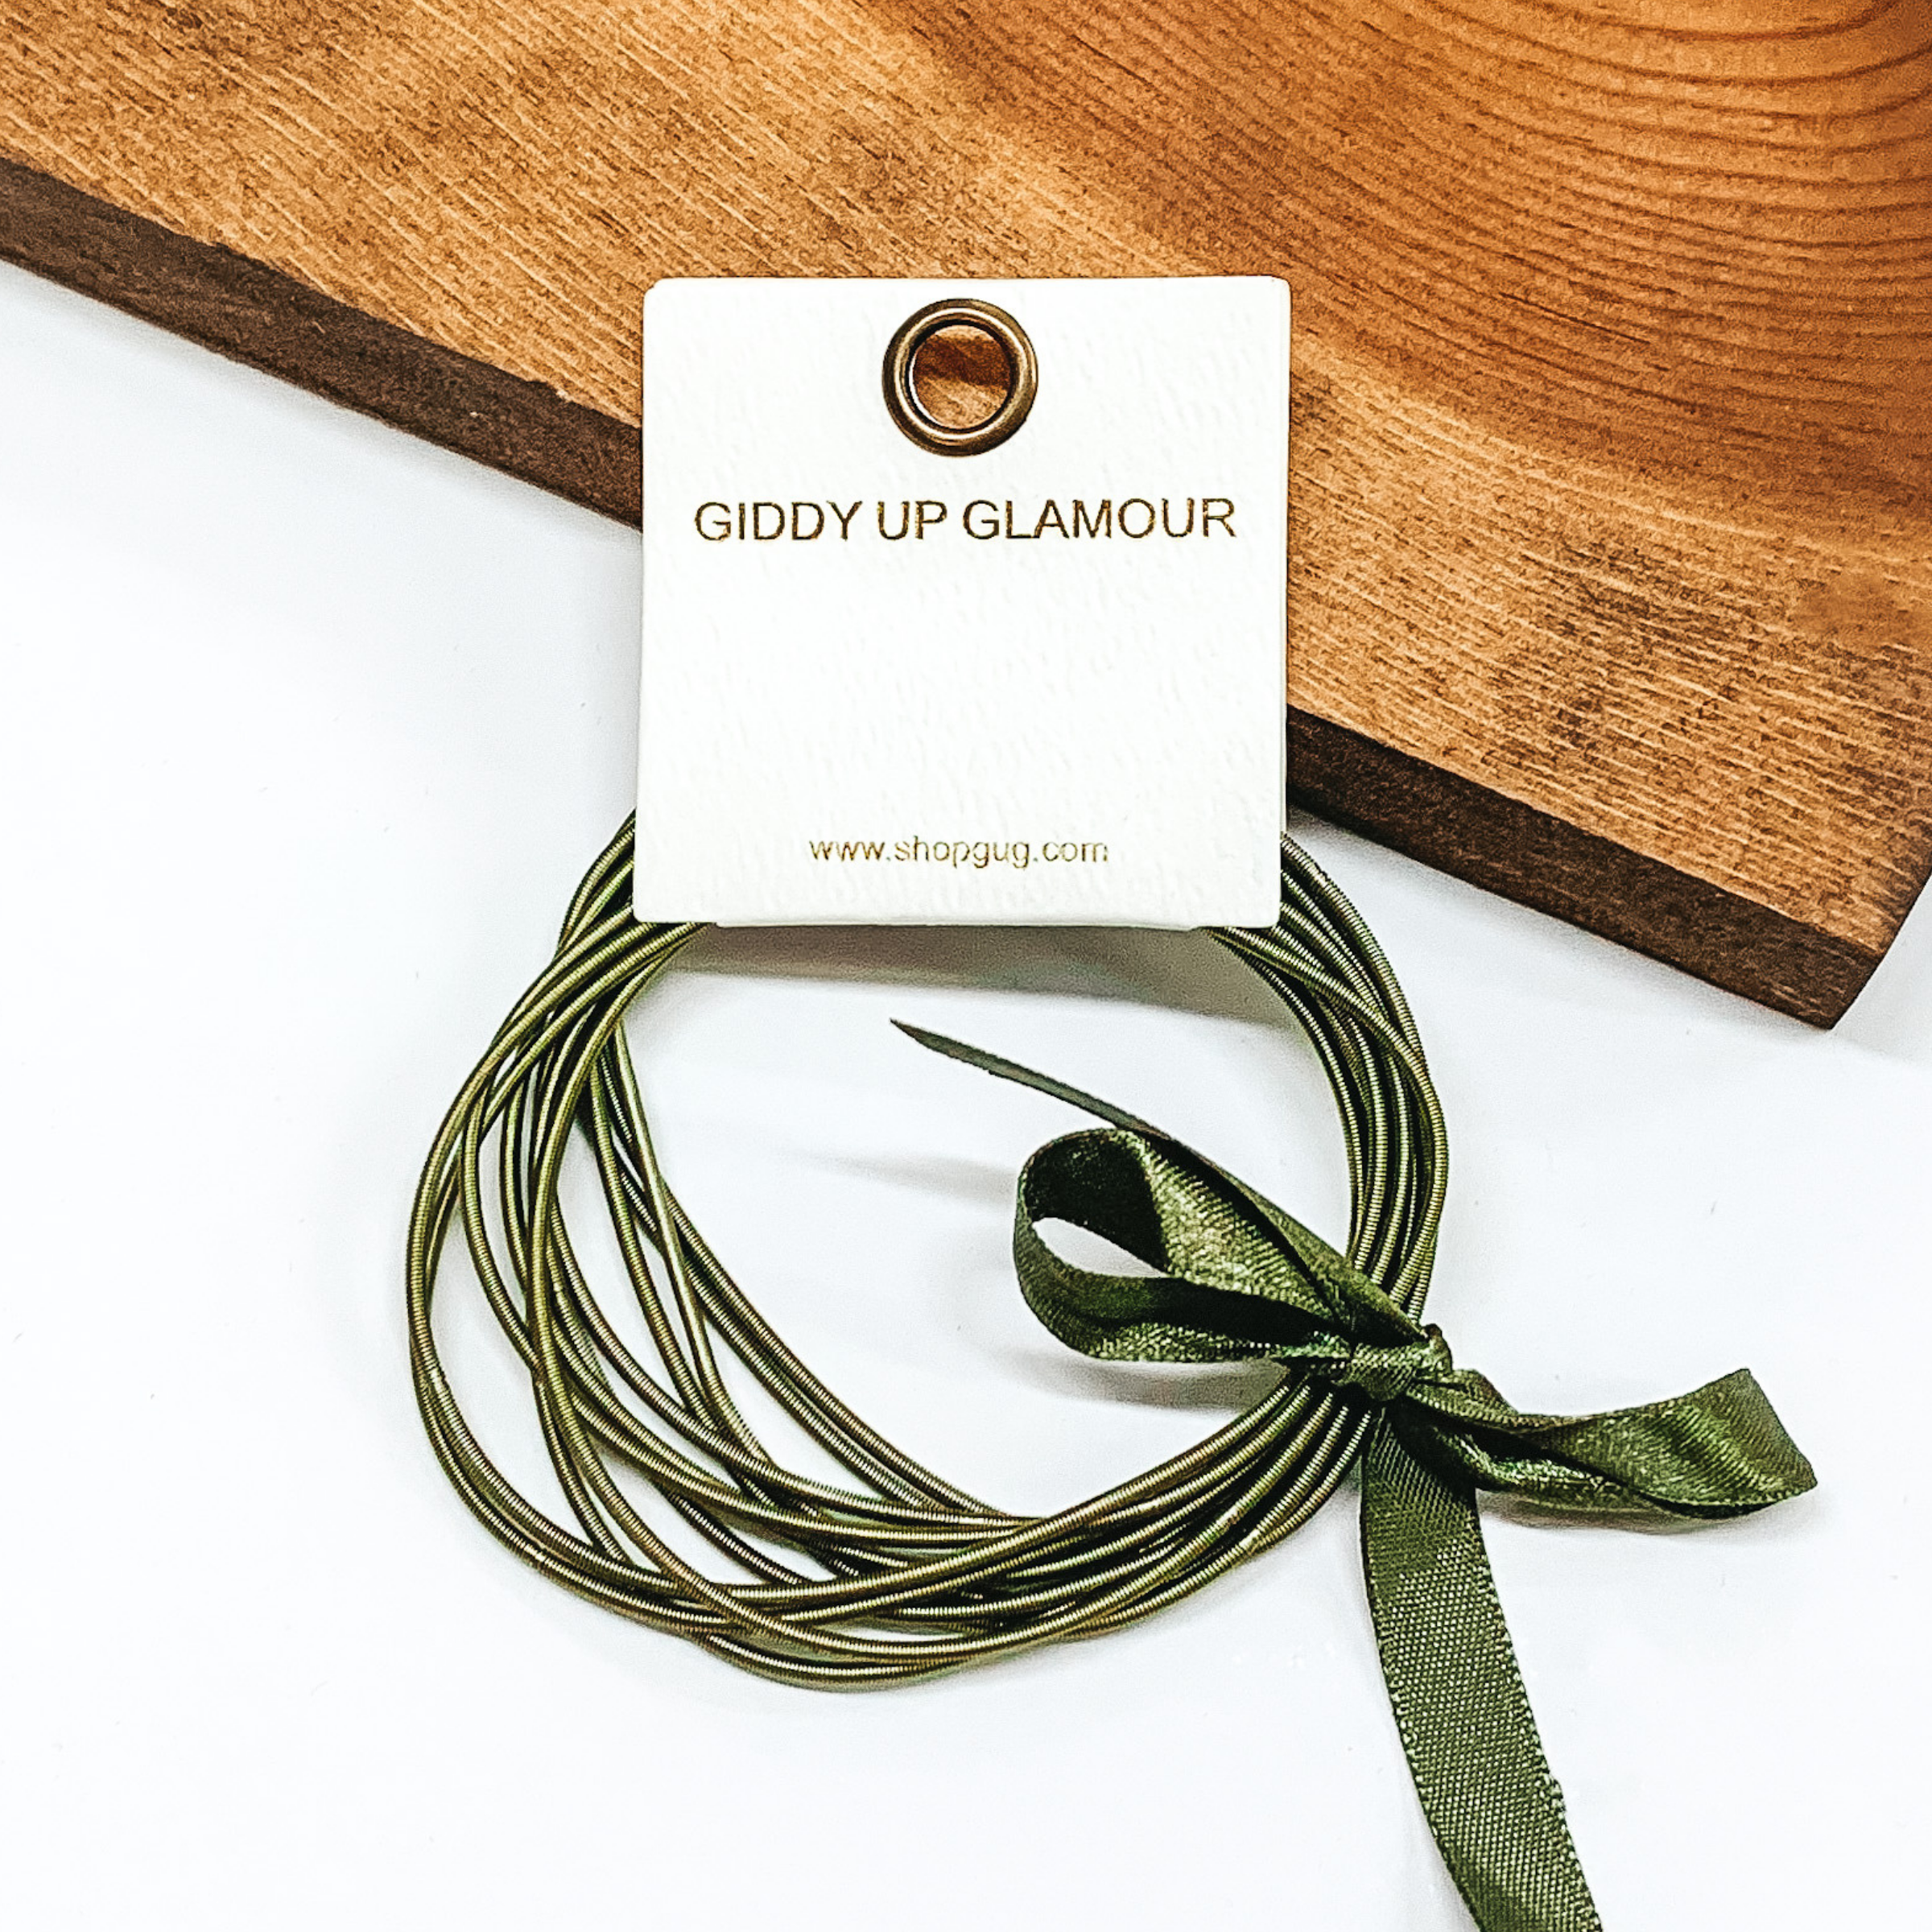 Group of olive green spring wire elastic bracelet set tied together with an olive green ribbon that is tied in a bow. This bracelet set is pictured laying against a piece of wood on a white background. 